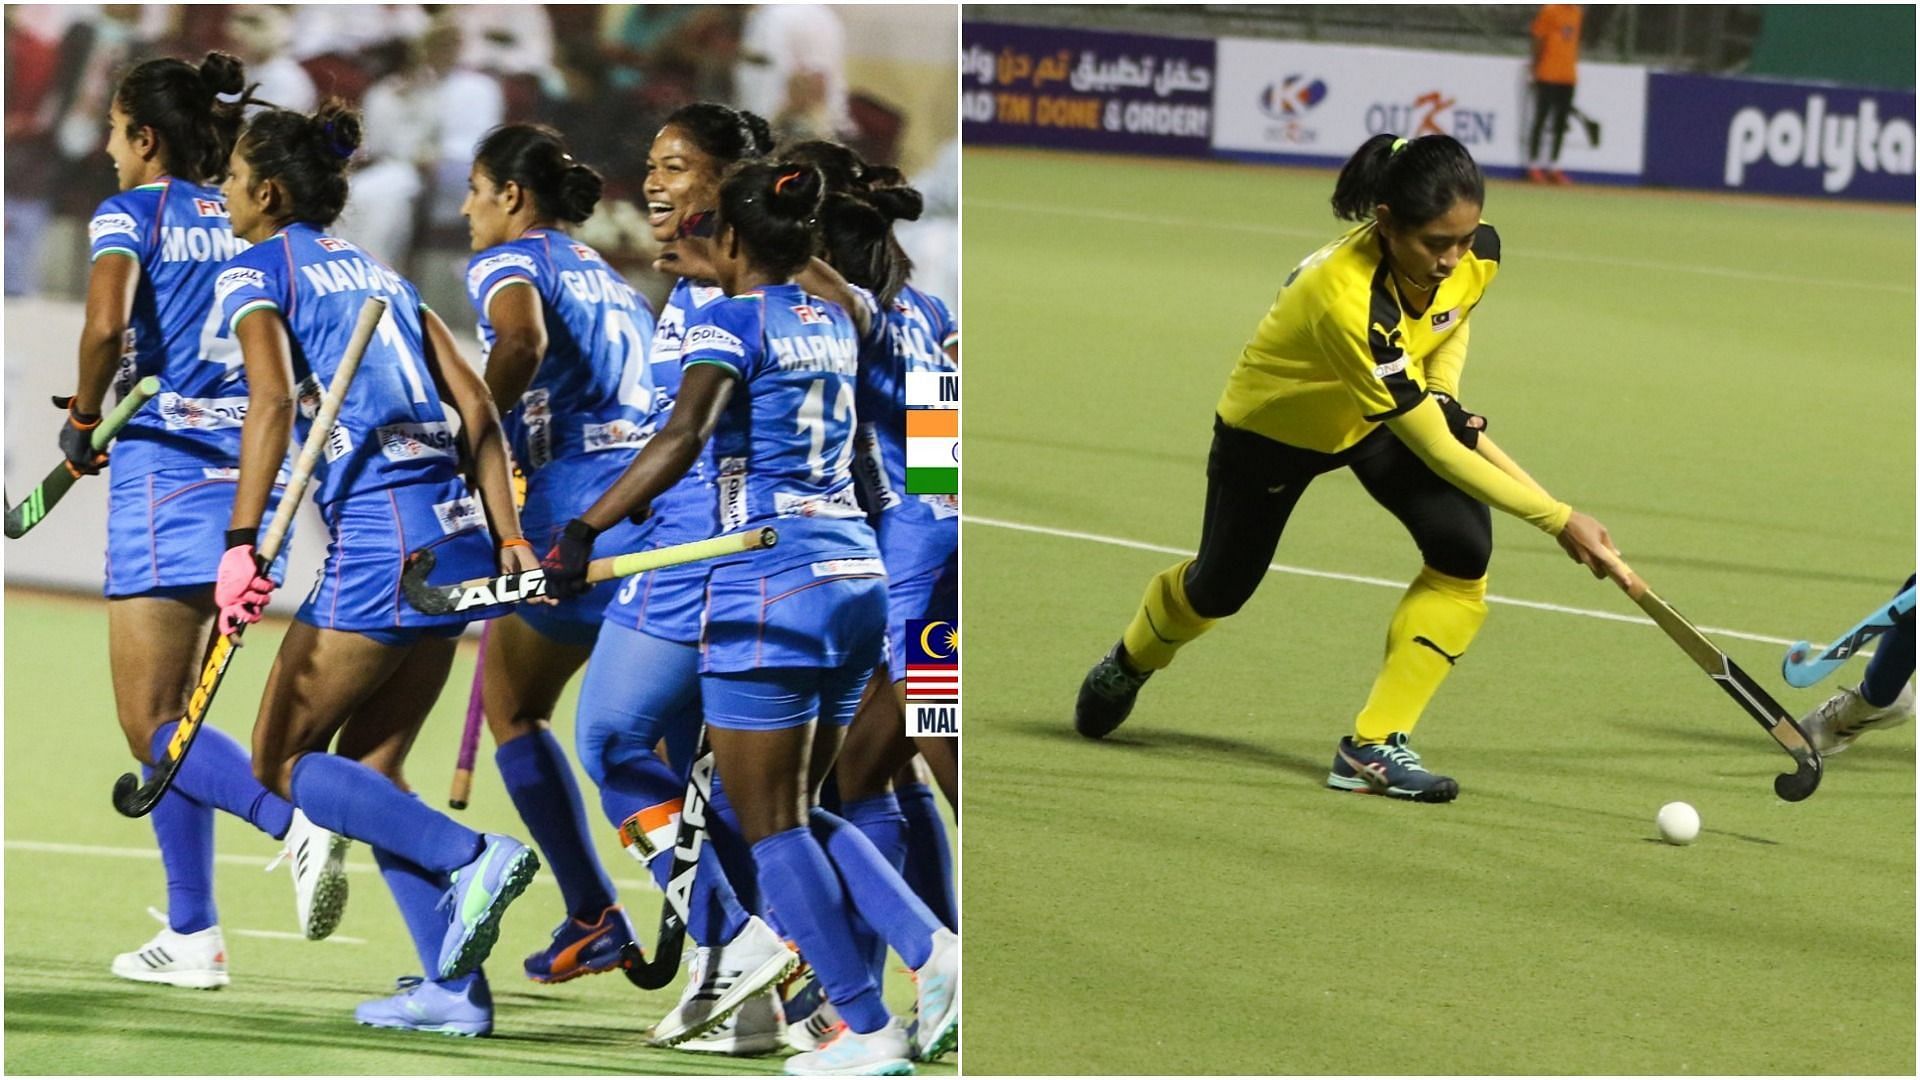 Action from India vs Malaysia match (Pic Credit: Hockey India)